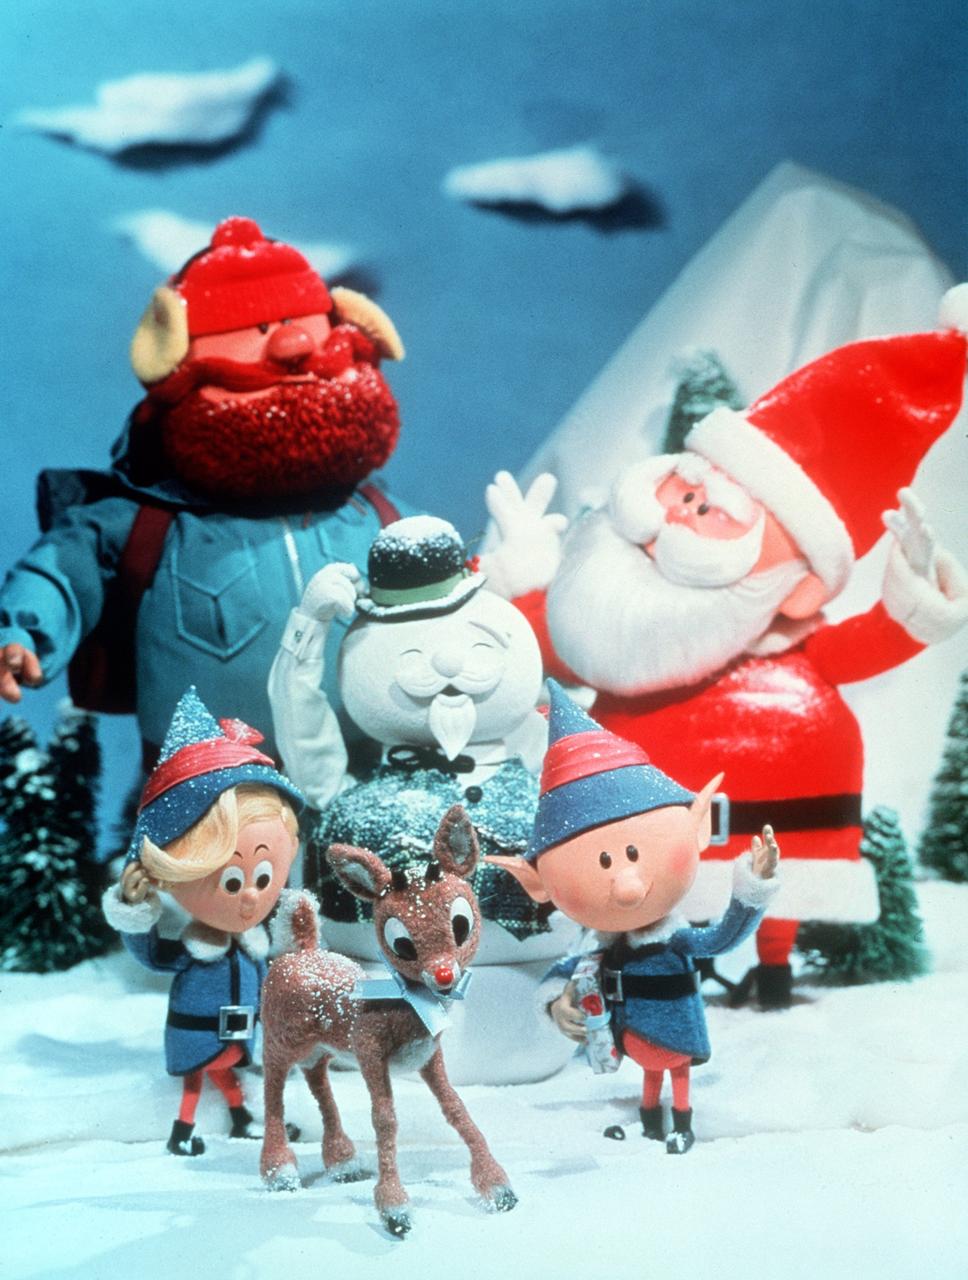 No. 12: Hermey from Rudolph the Red-Nosed Reindeer